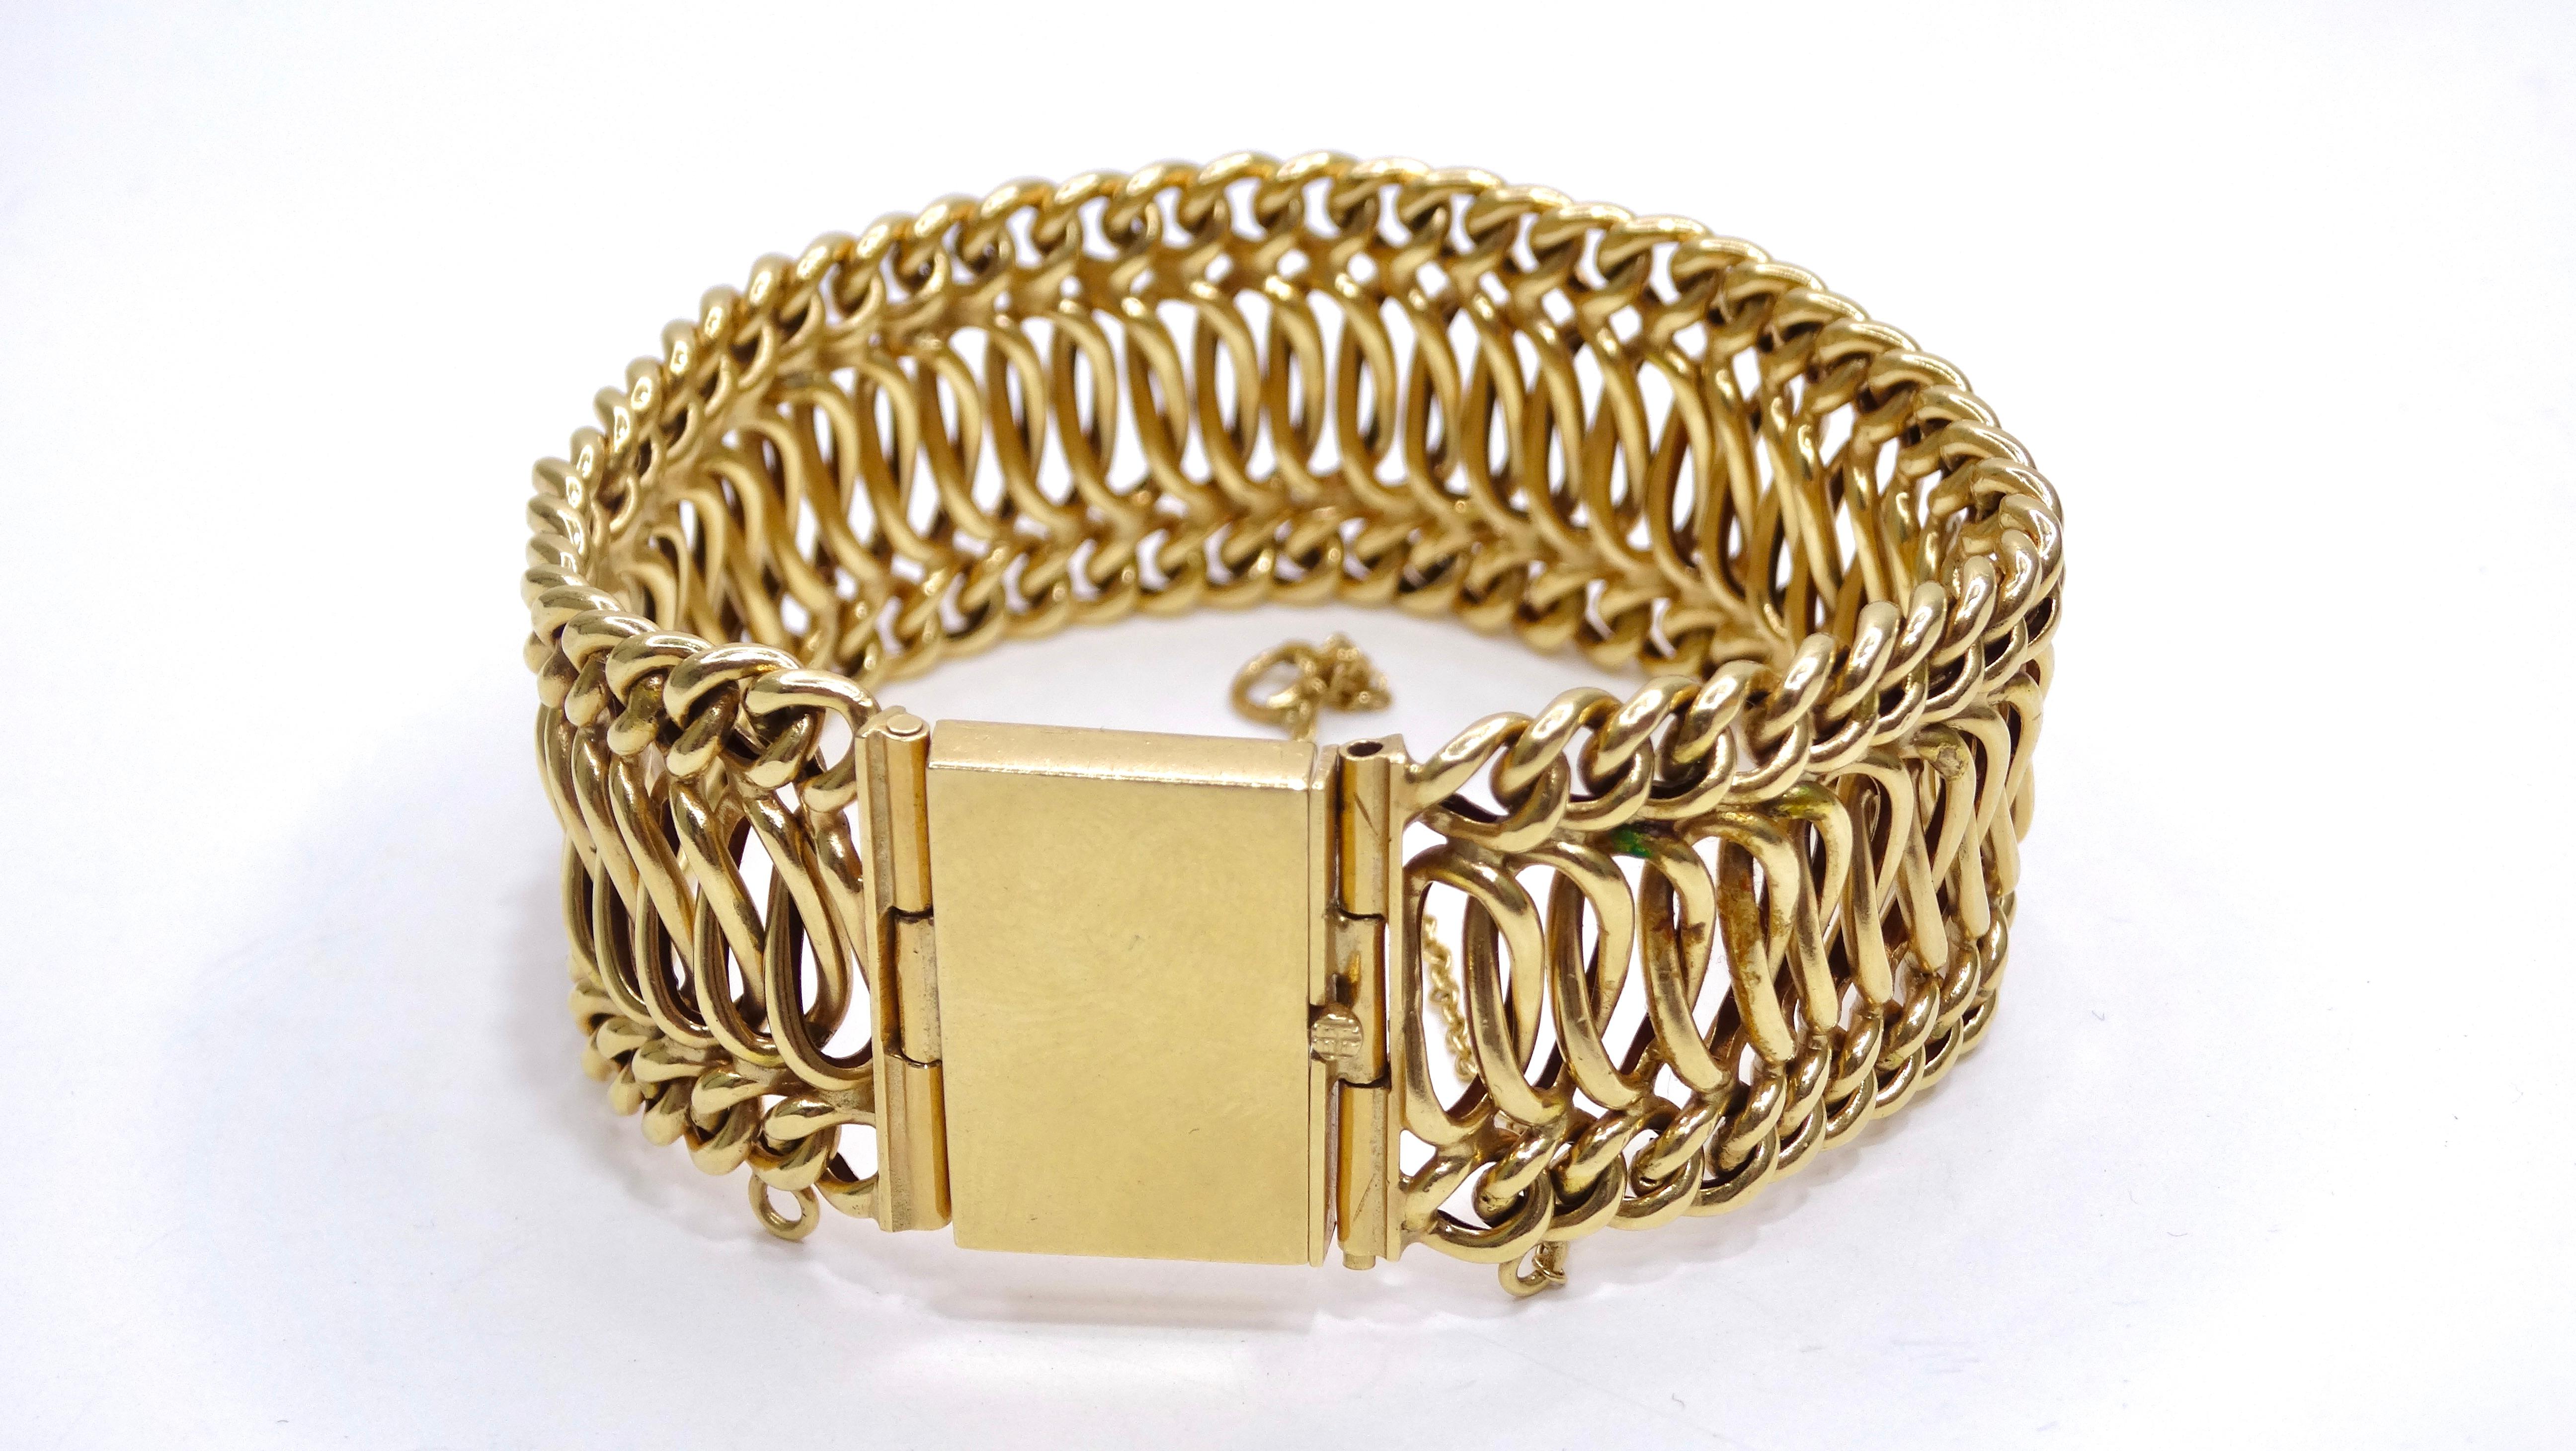 This circa 1950's chain bracelet gives an upgrade to the gold chain bracelet in your drawer. The details on this bracelet is something to write home about as it has a tons of intricate woven metal. Pair this beautiful bracelet with a vintage printed